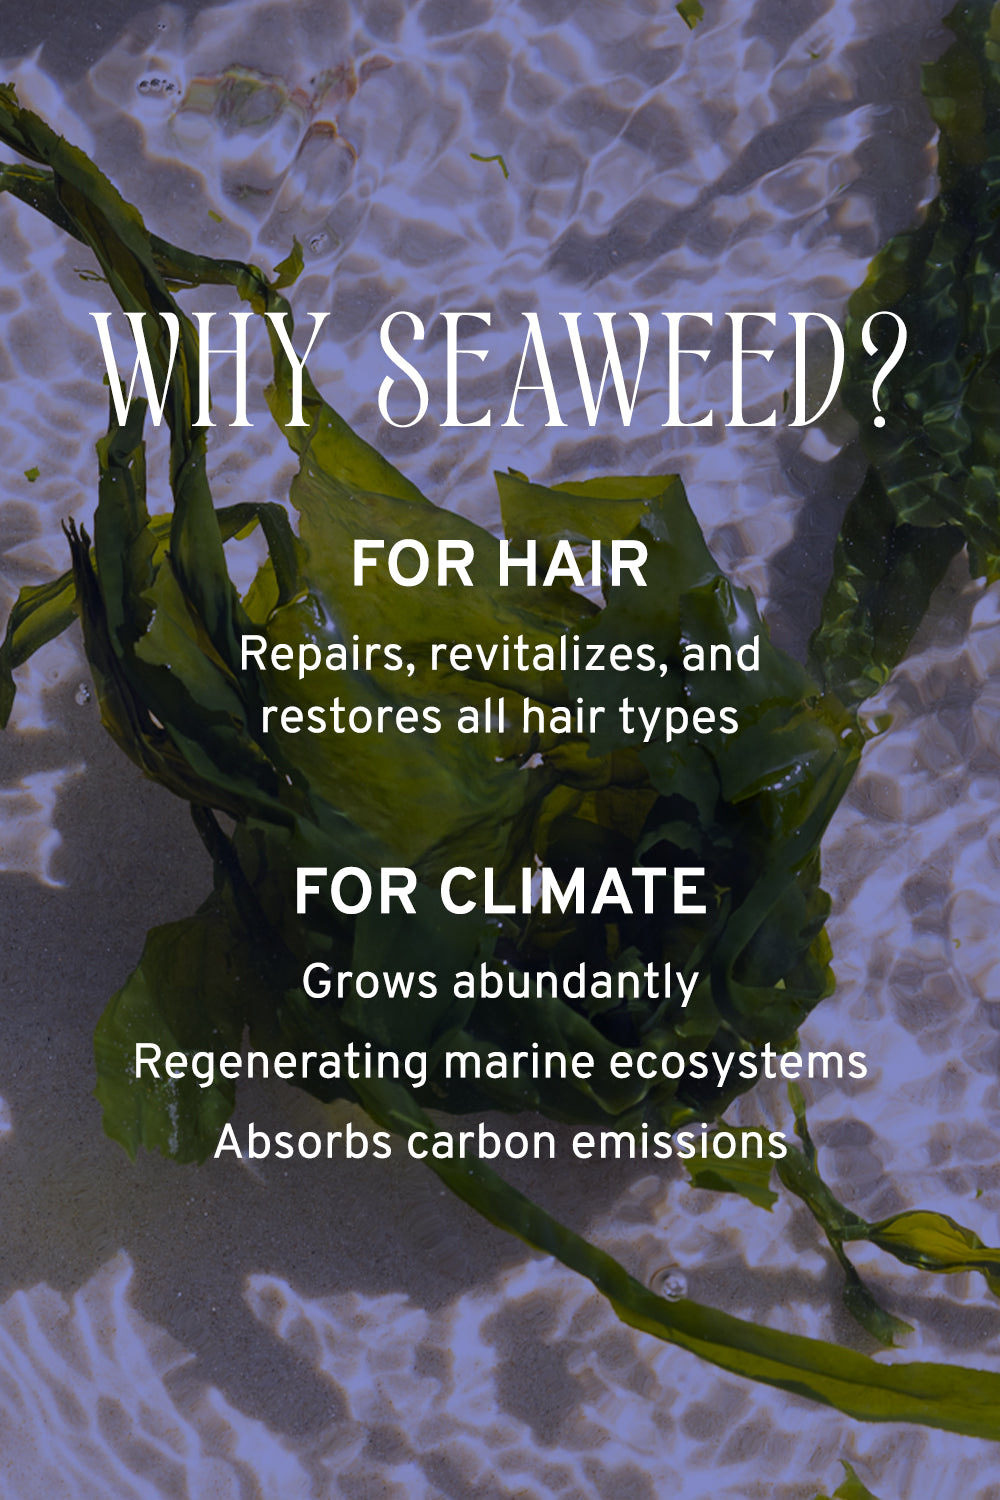 the benefits of seaweed for hair and climate 